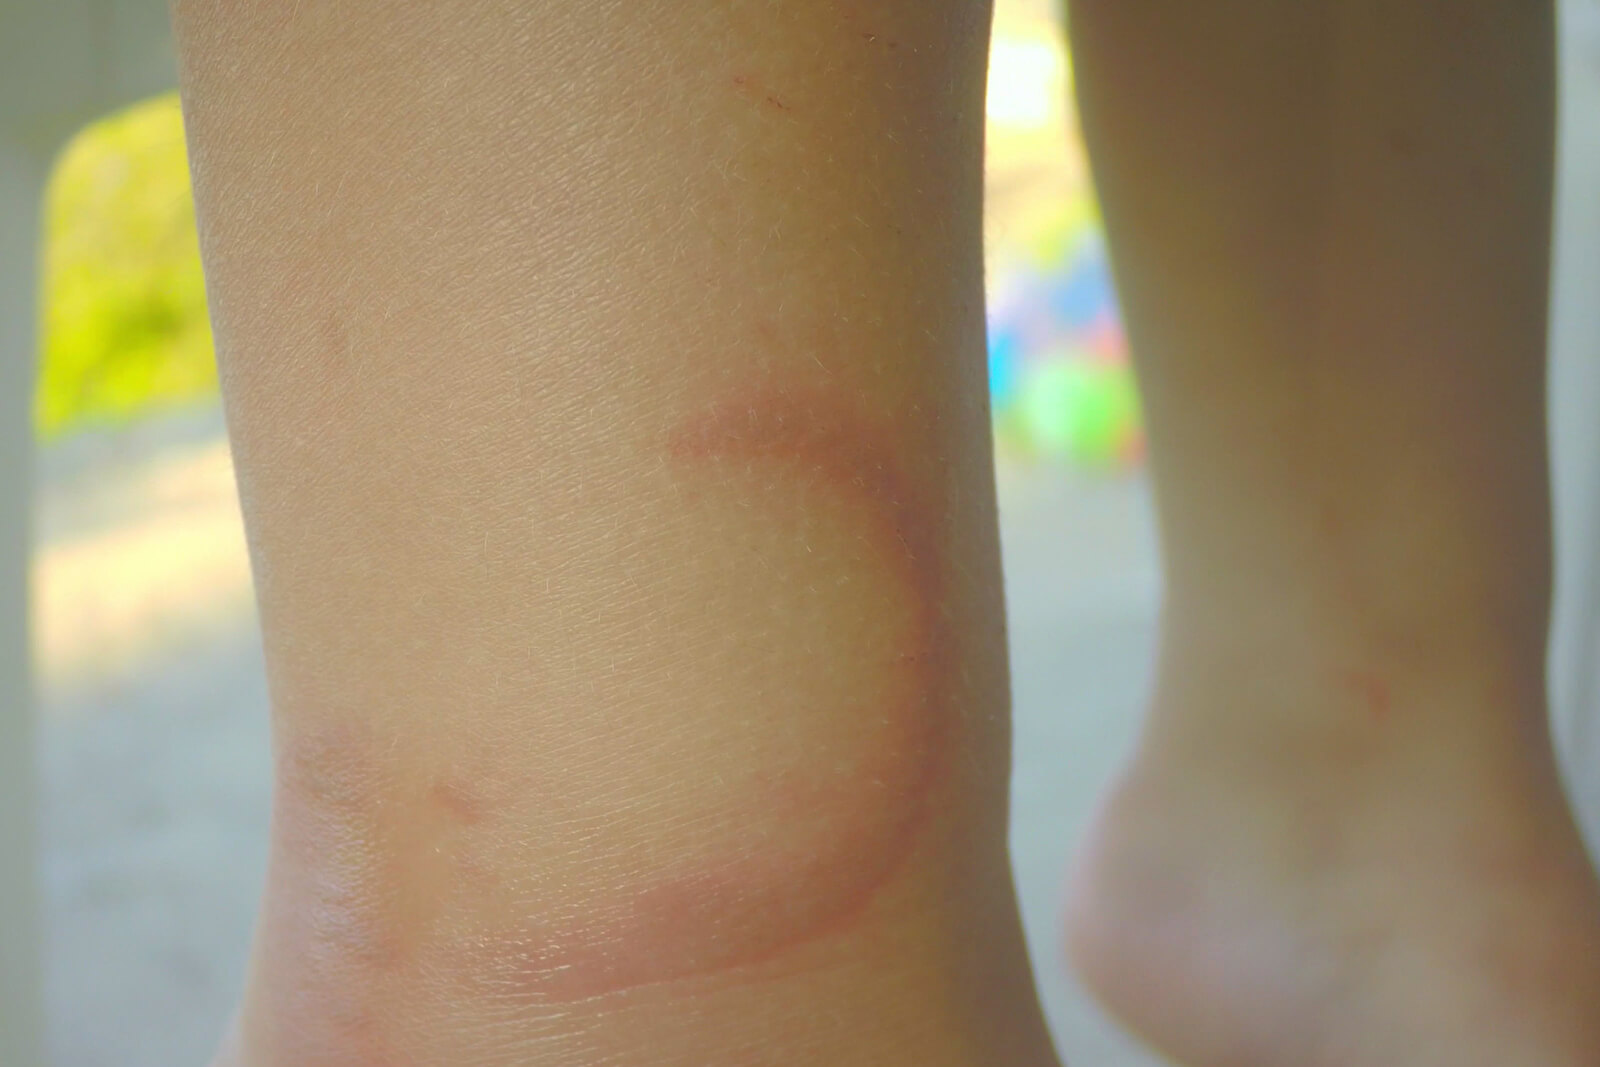 A child with a red mark on his leg.